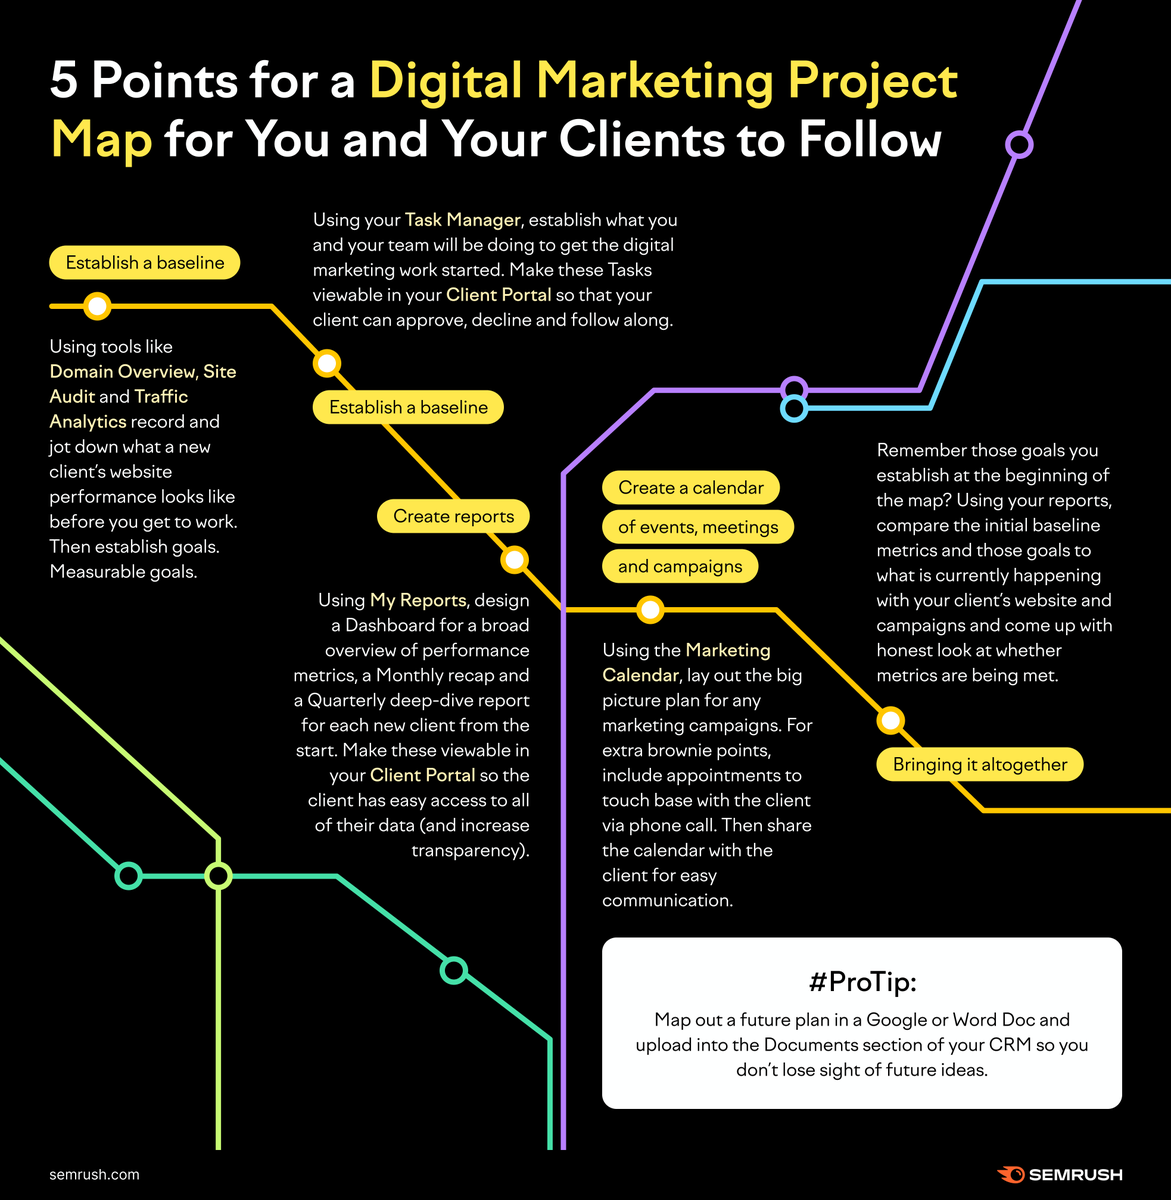 5 points for a digital marketing project map for you and your clients to follow. Plot it all here📍 social.semrush.com/3xLKlxJ.